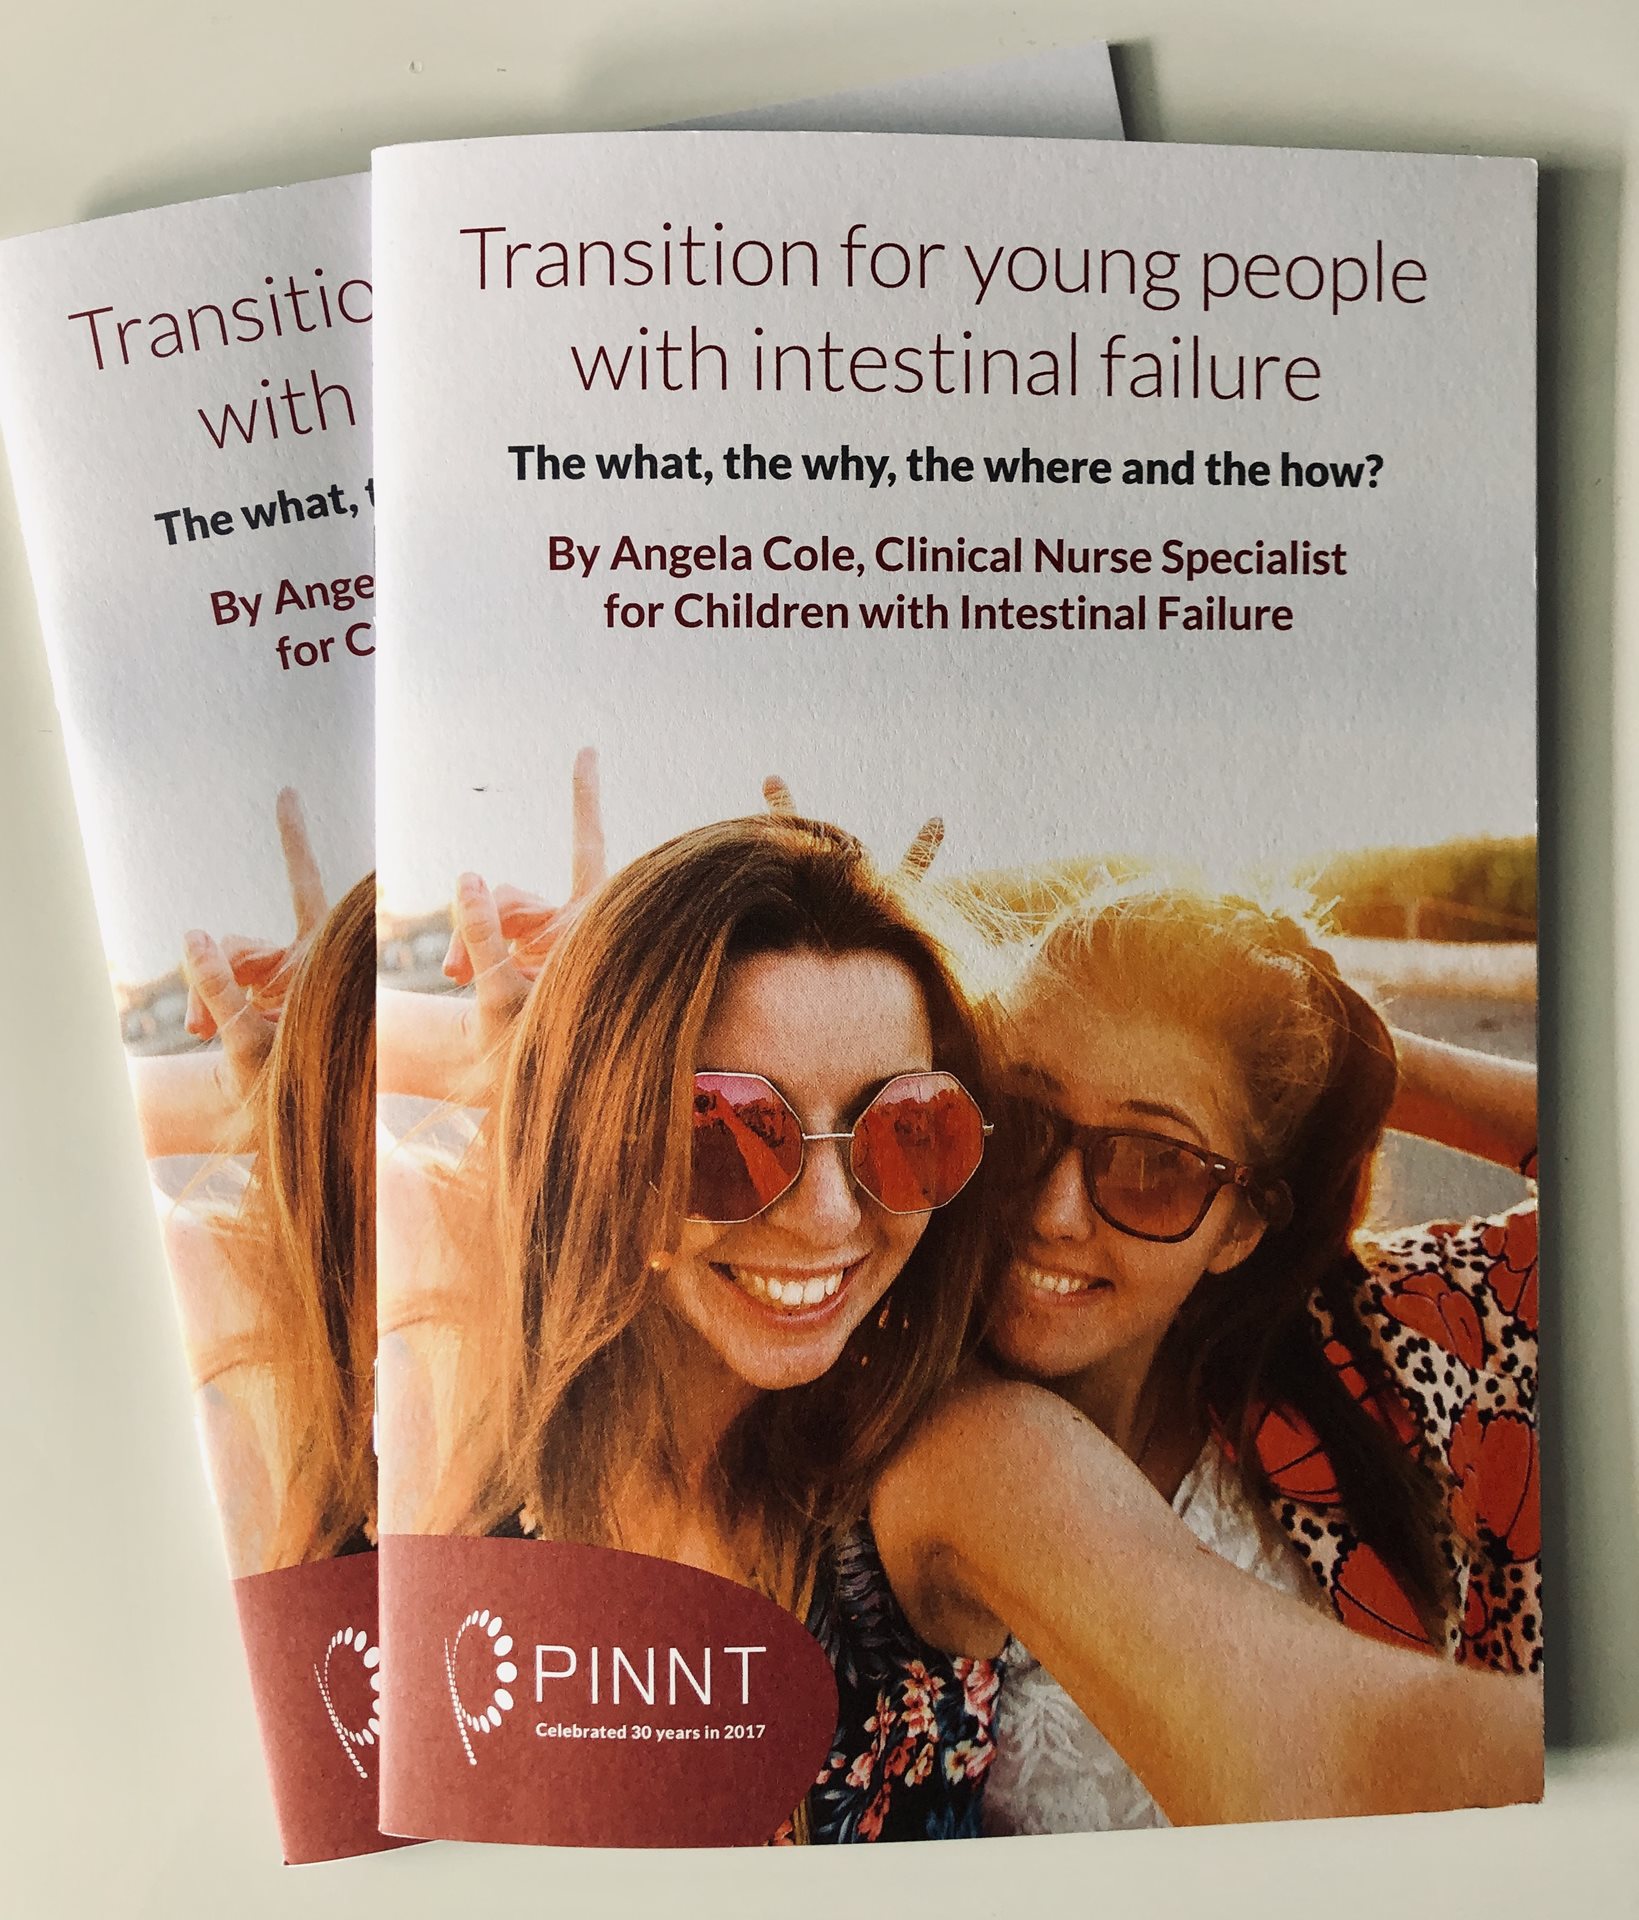 The Transition booklets project